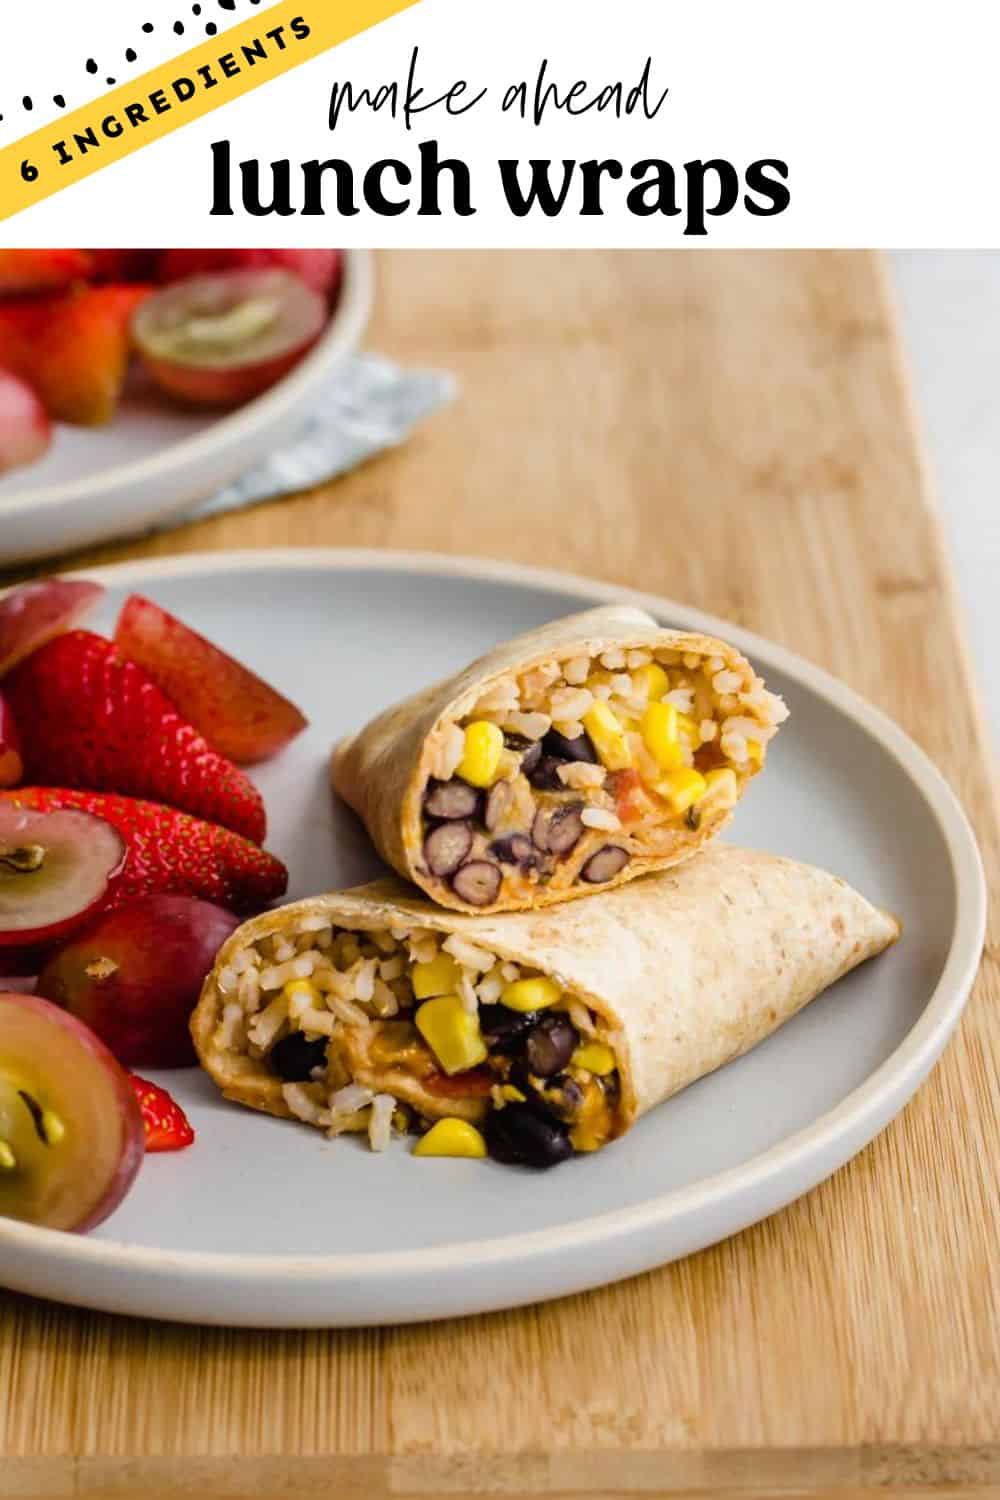 Make Ahead Lunch Wraps with cheese, rice, and beans on a plate.